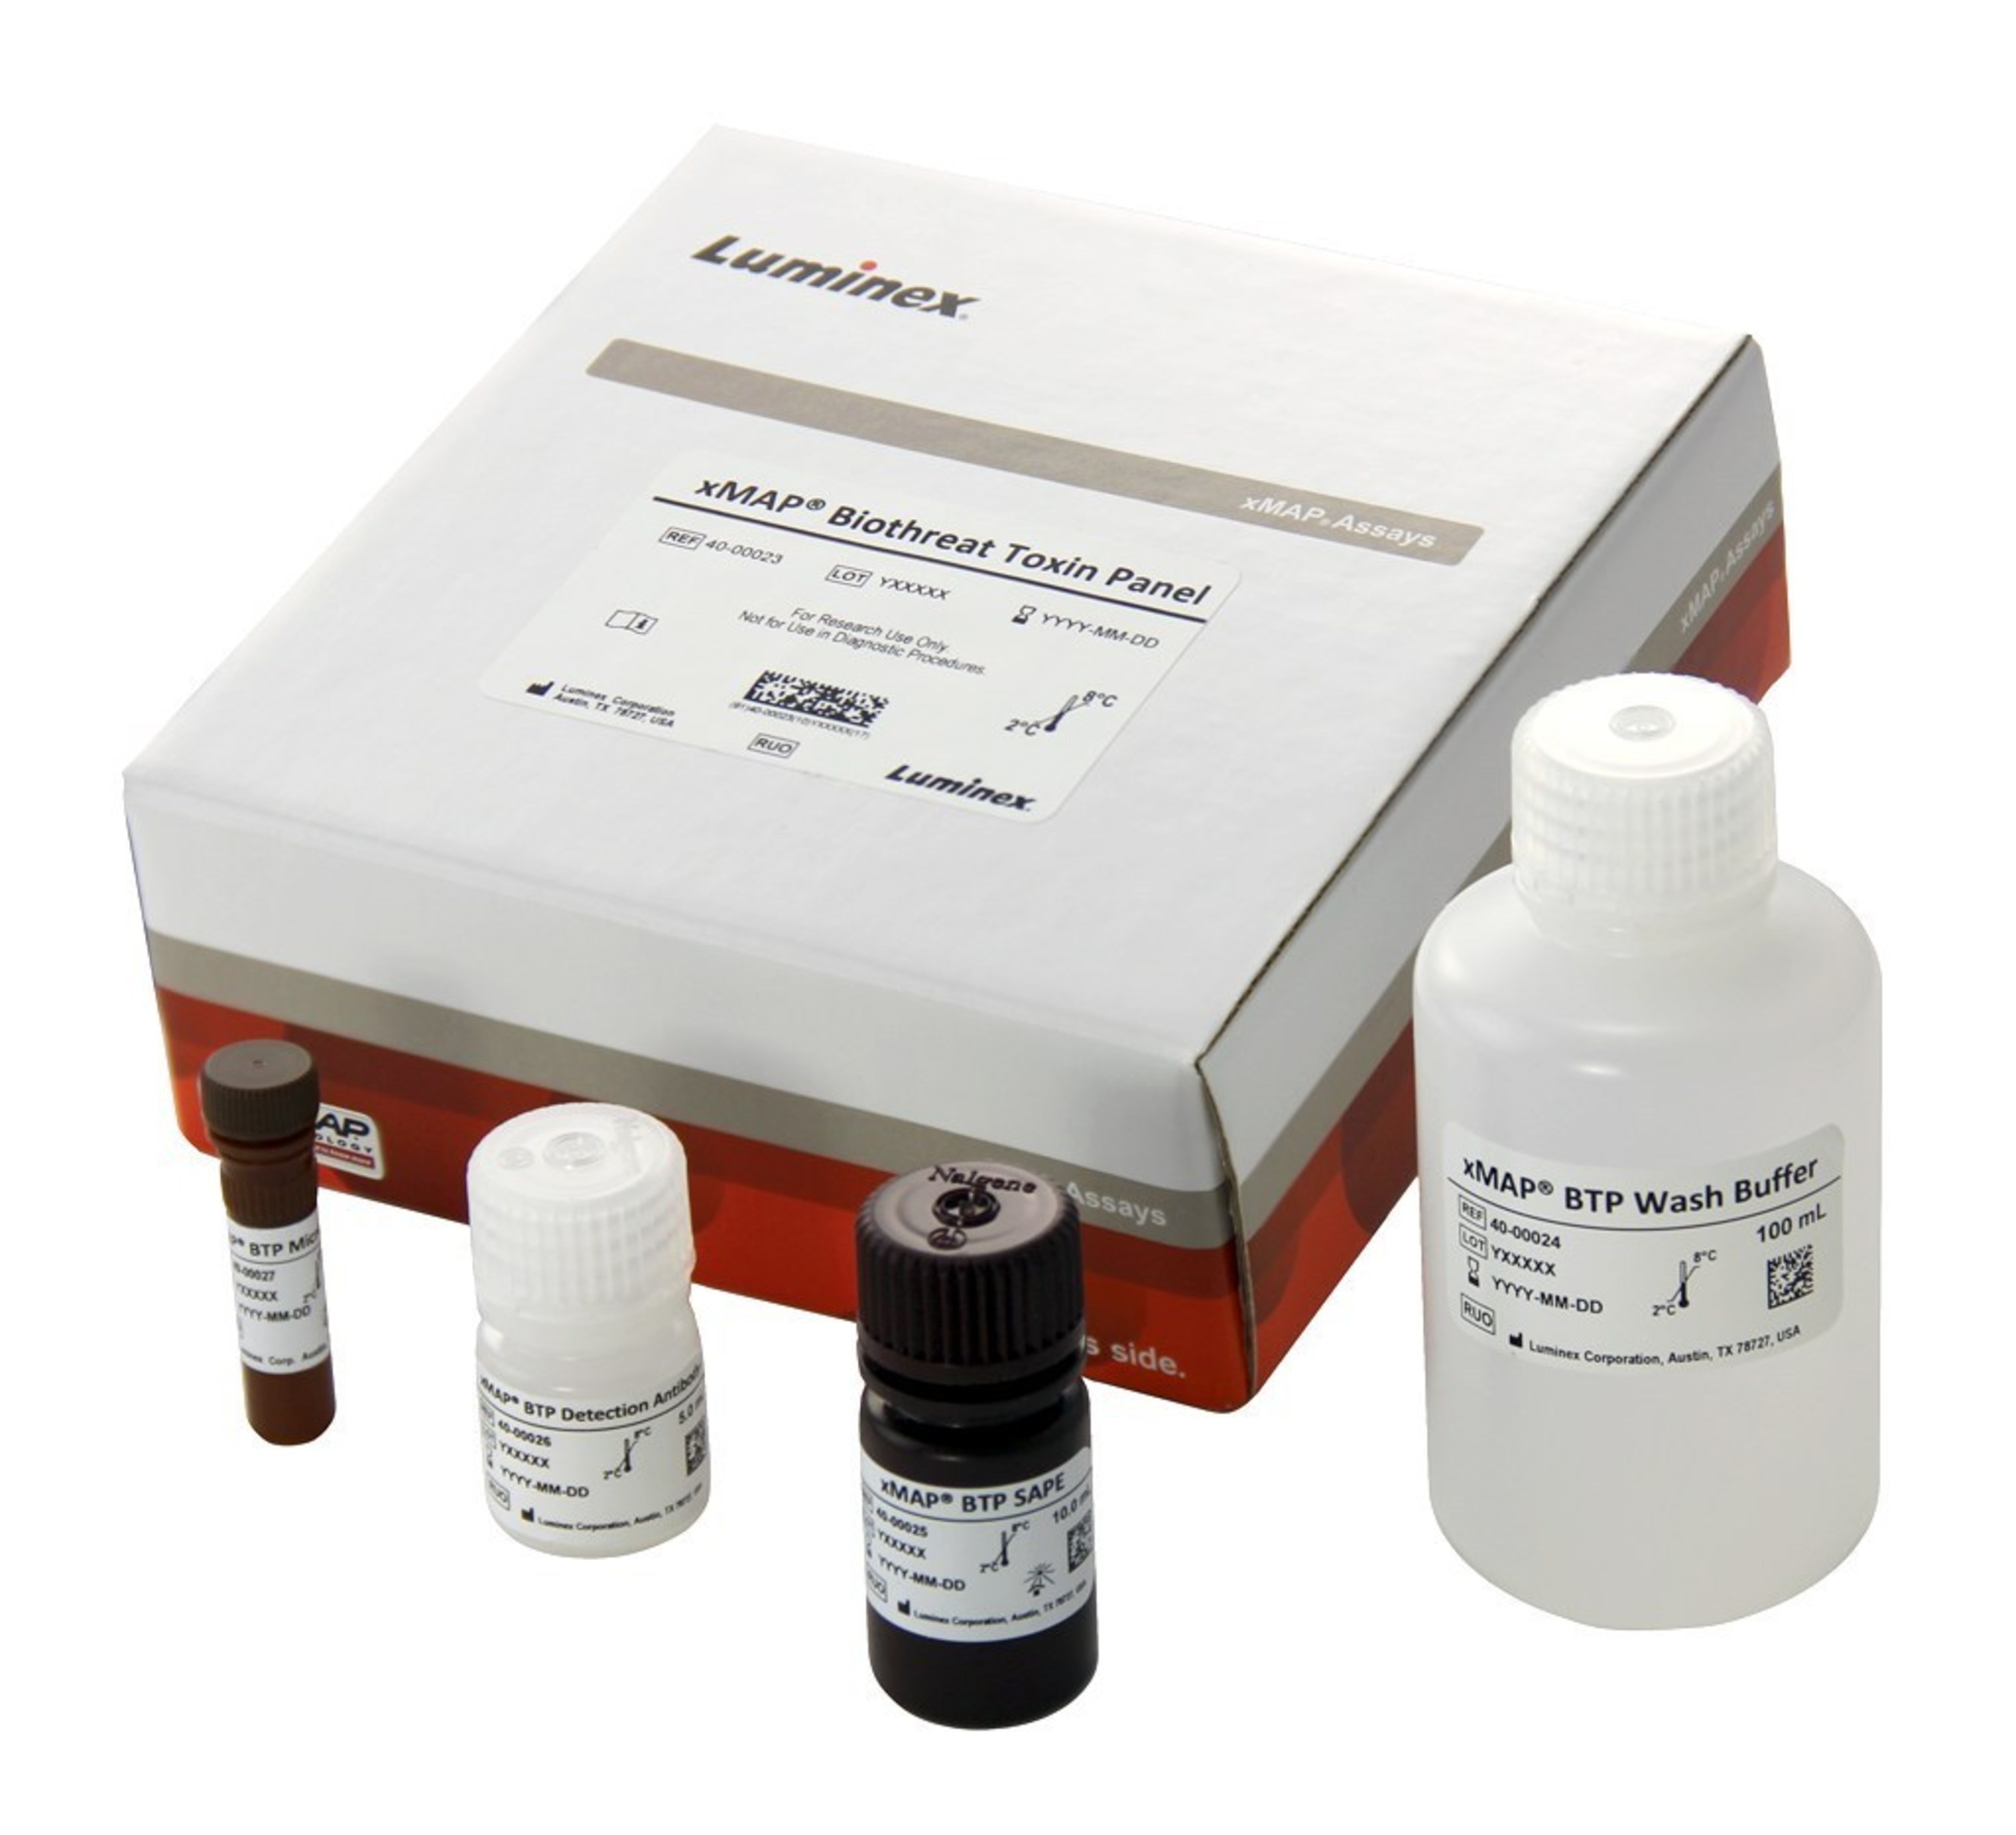 xMAP(R) Biothreat Toxin Panel is an immunoassay which simultaneously screens for six of the most toxic substances that may threaten the nation's food supply.